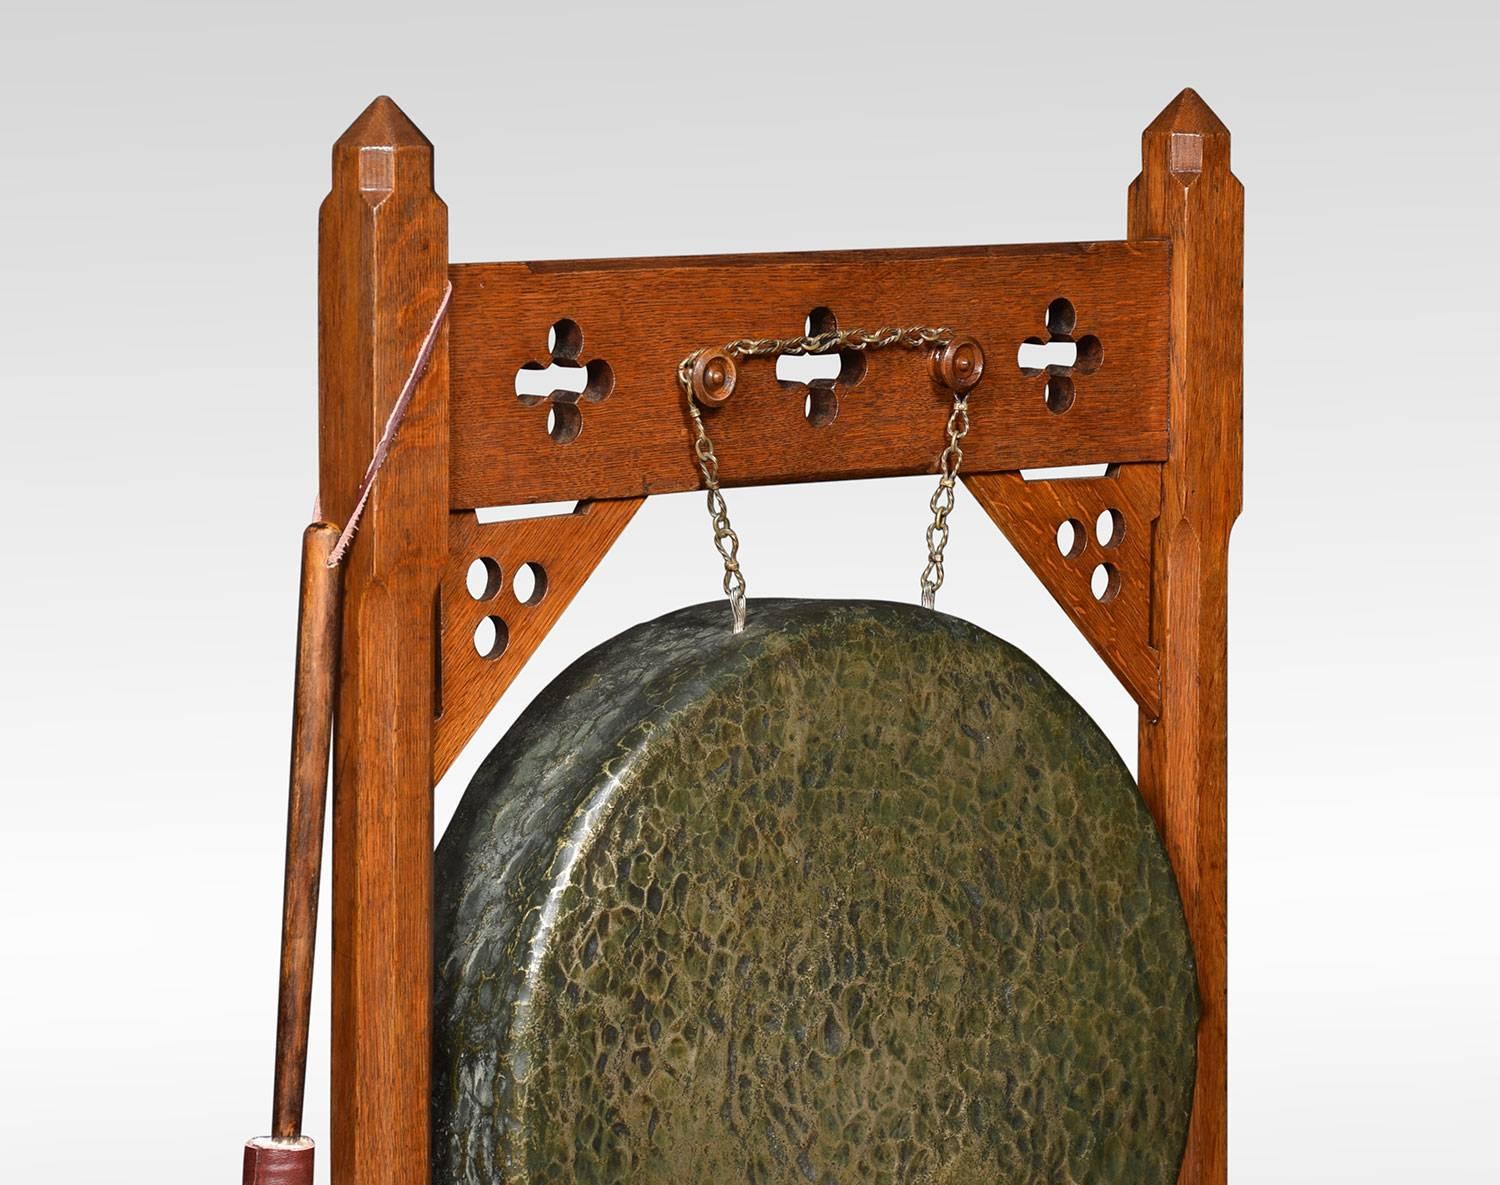 Gothic Revival late Victorian carved oak framed brass dinner gong and beater, the stand having canted corner supports with suspended brass gong to centre raised up on shaped feet.

Dimensions:
Height 41.5 inches
Width 24 inches
Depth 14.5